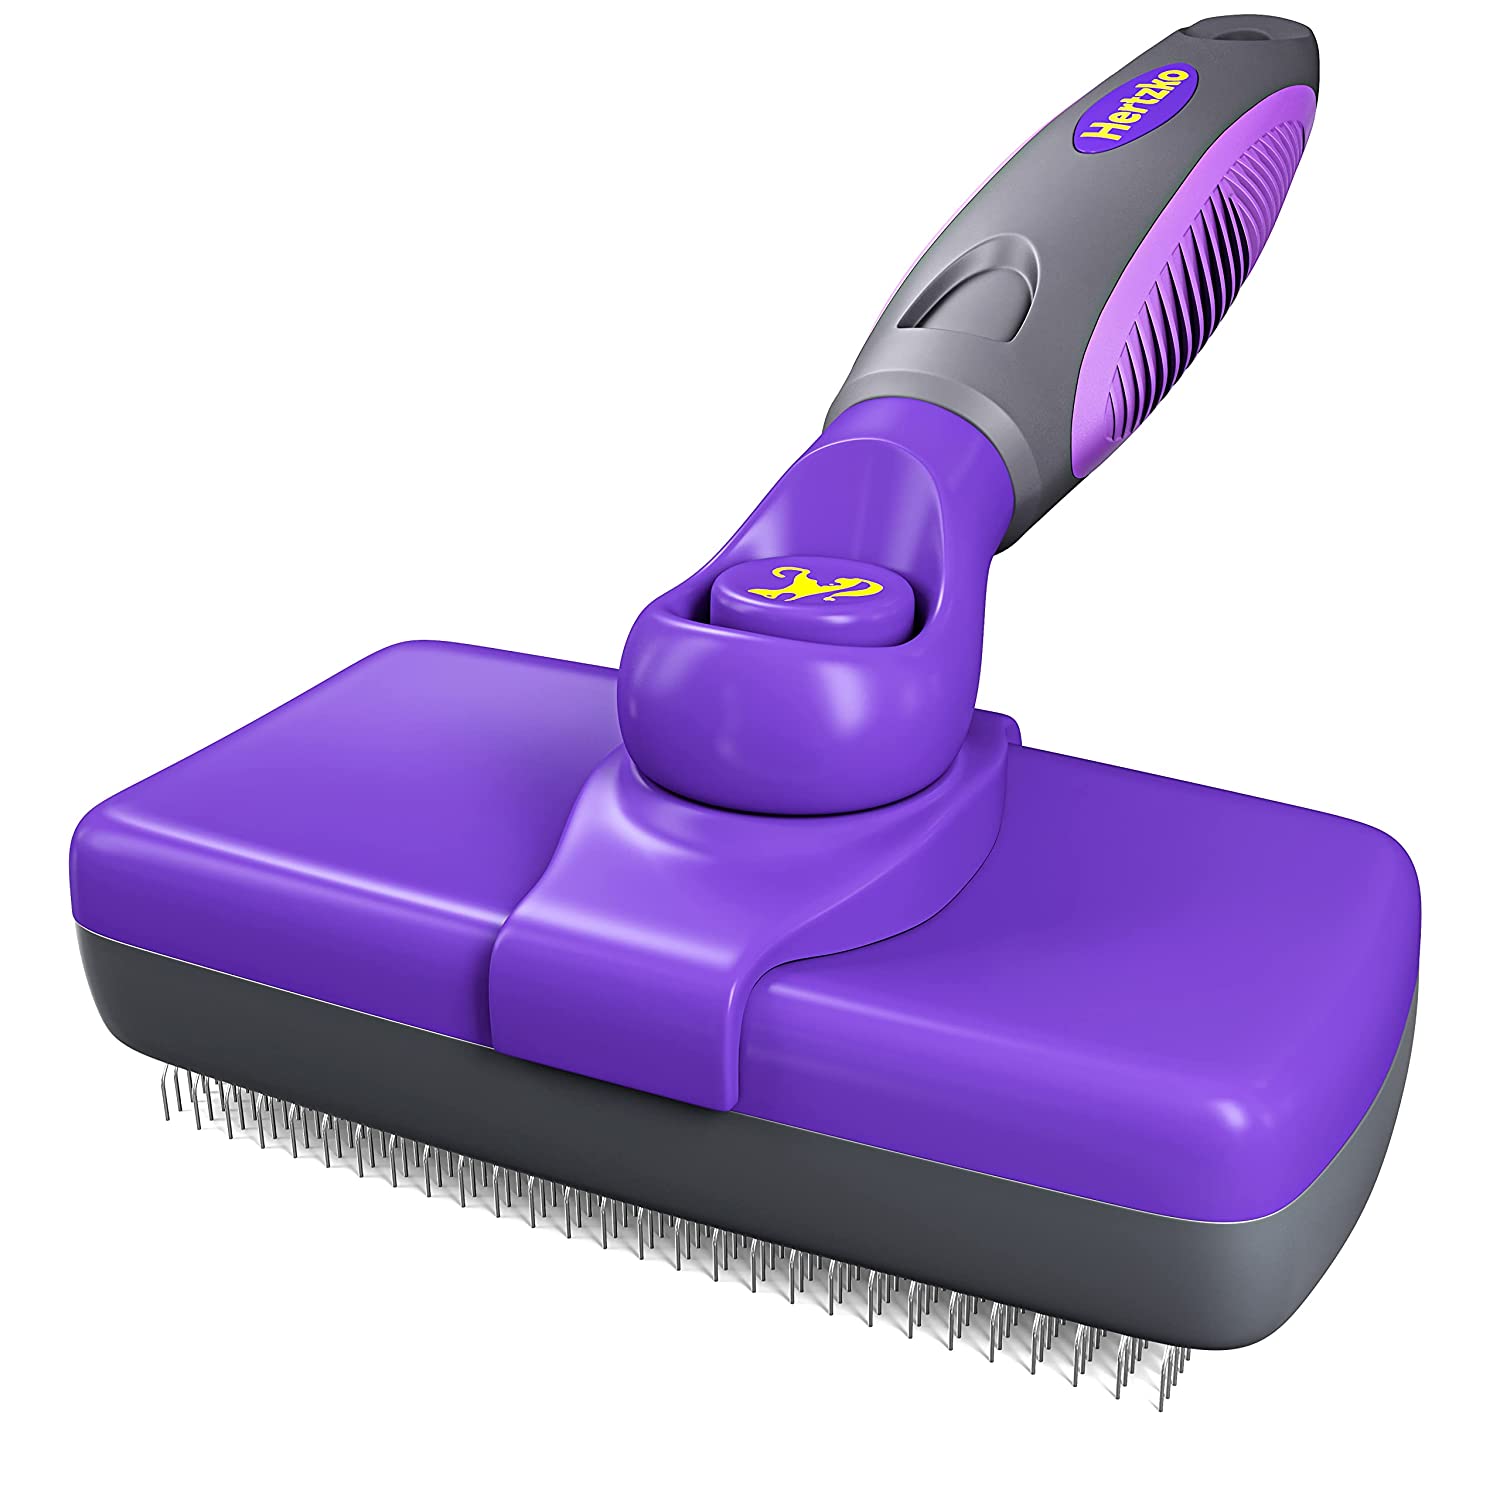 Our Favorite Products for Dog Owners: Hertzko Self-Cleaning Slicker Brush